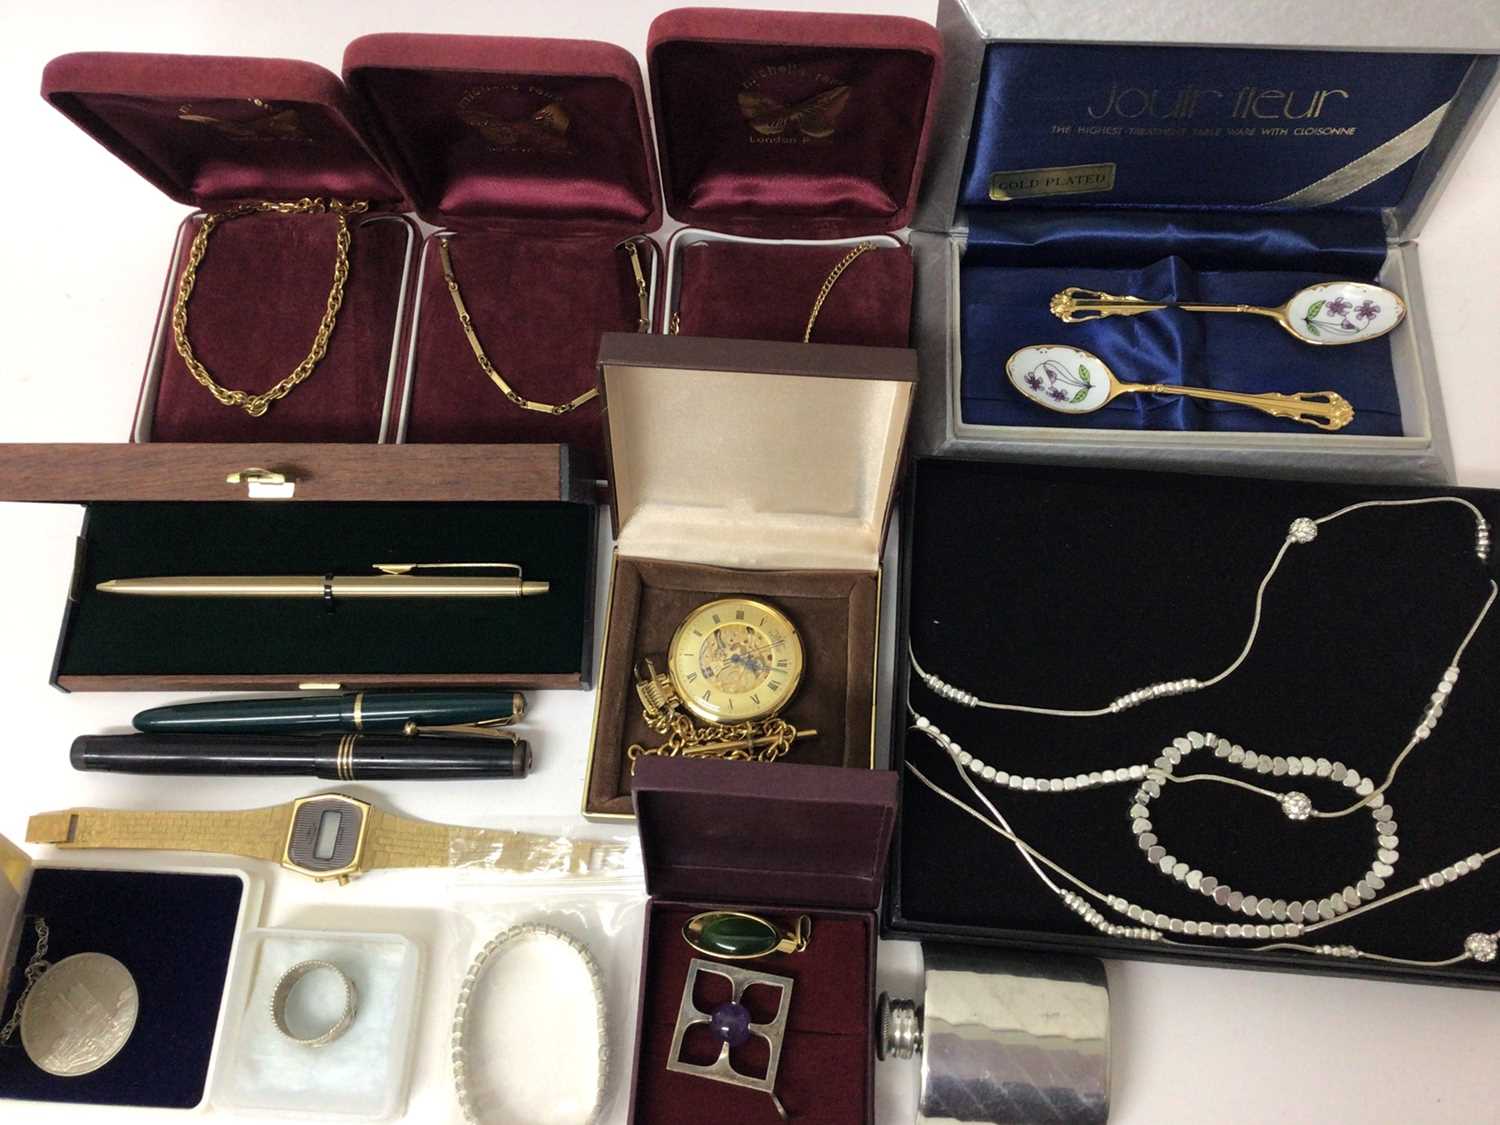 Lot 91 - Costume jewellery including gold plated chains, silver amethyst pendant, Jean Pierre fob watch on chain, various fountain pens and other items